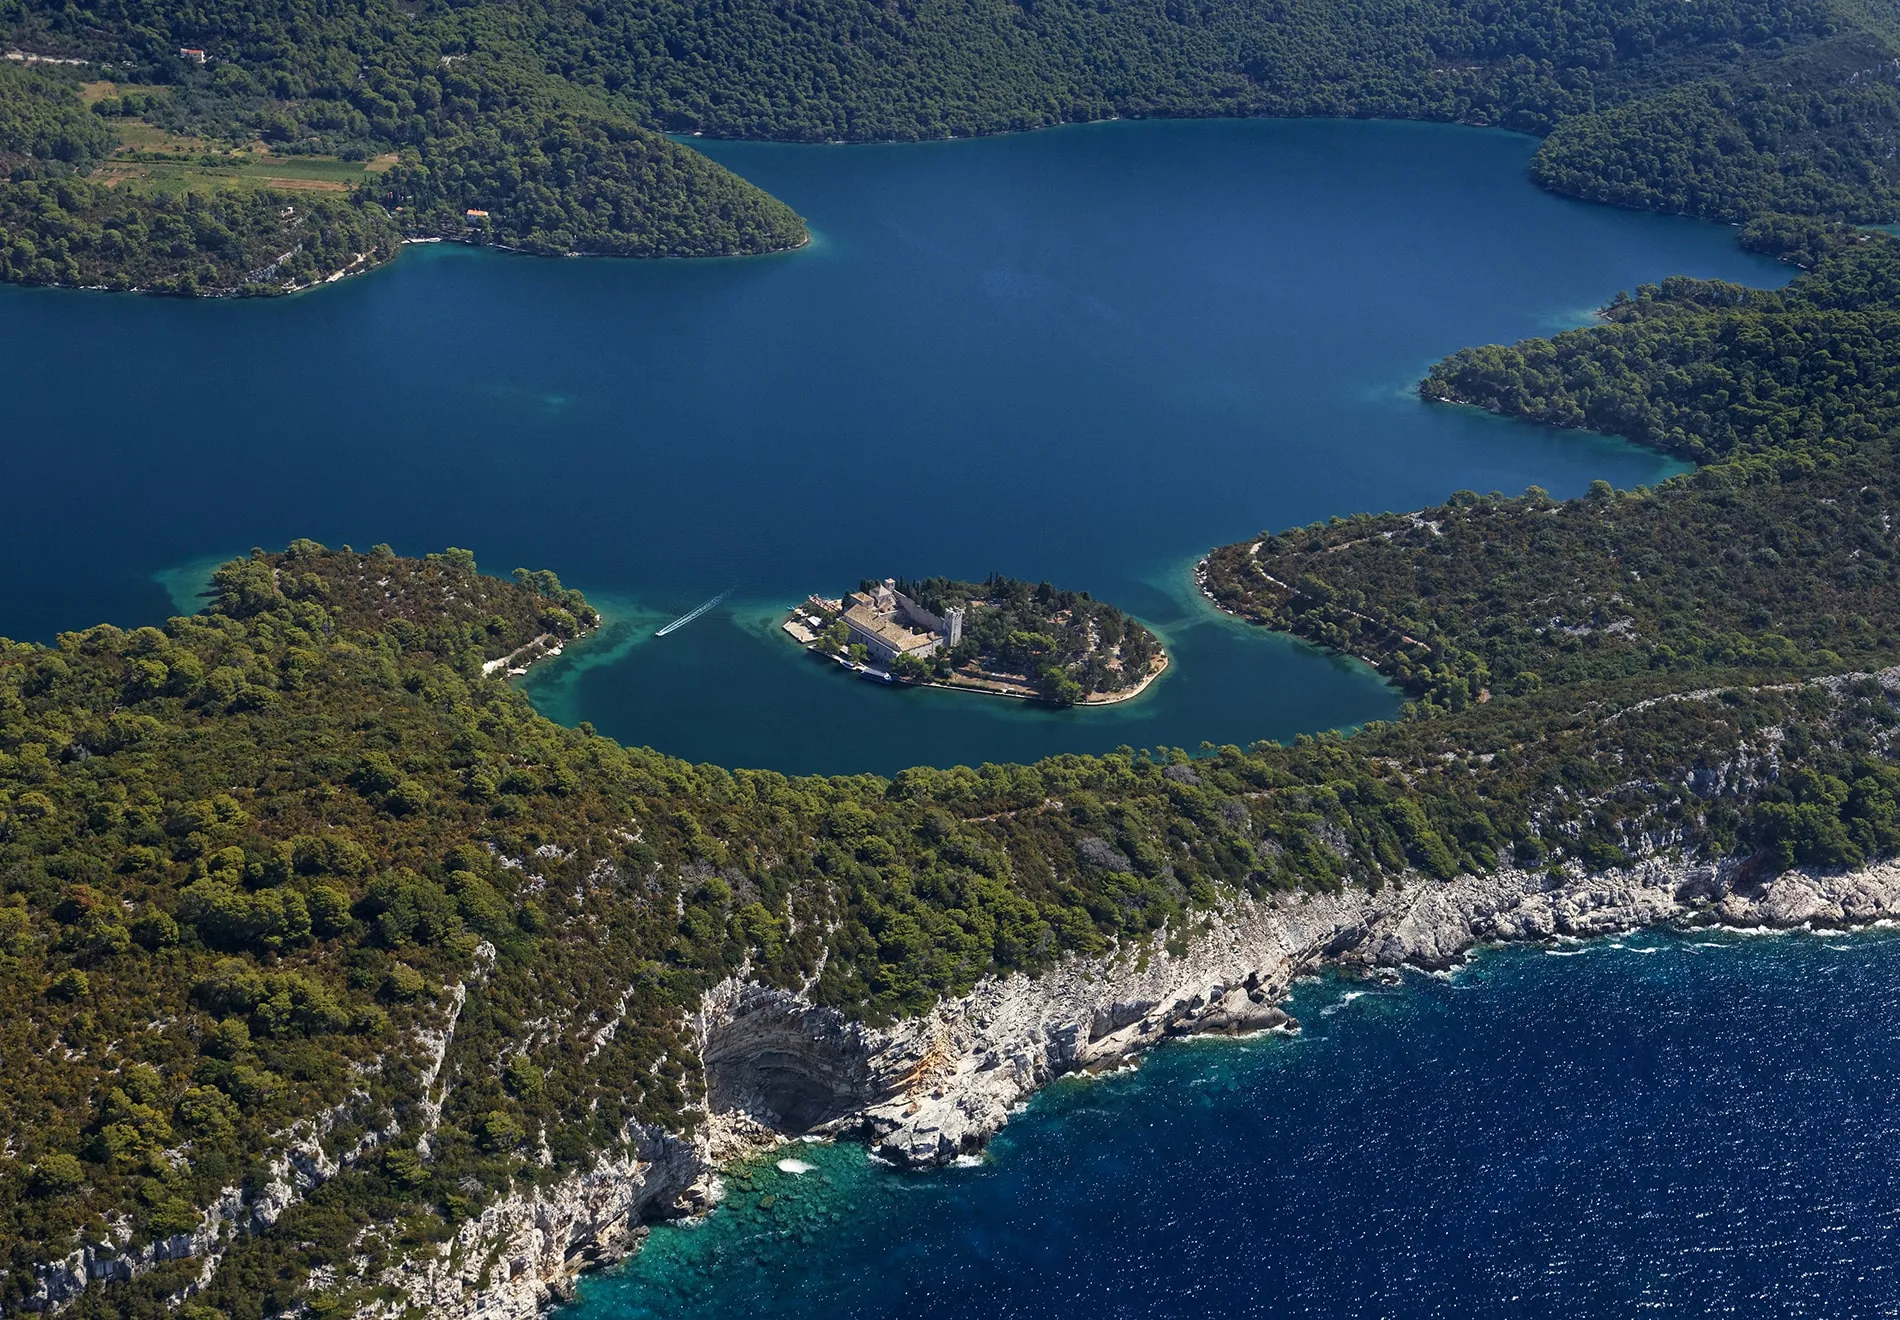 If the focus is more on the nature specter then I would recommend the islands of Mljet